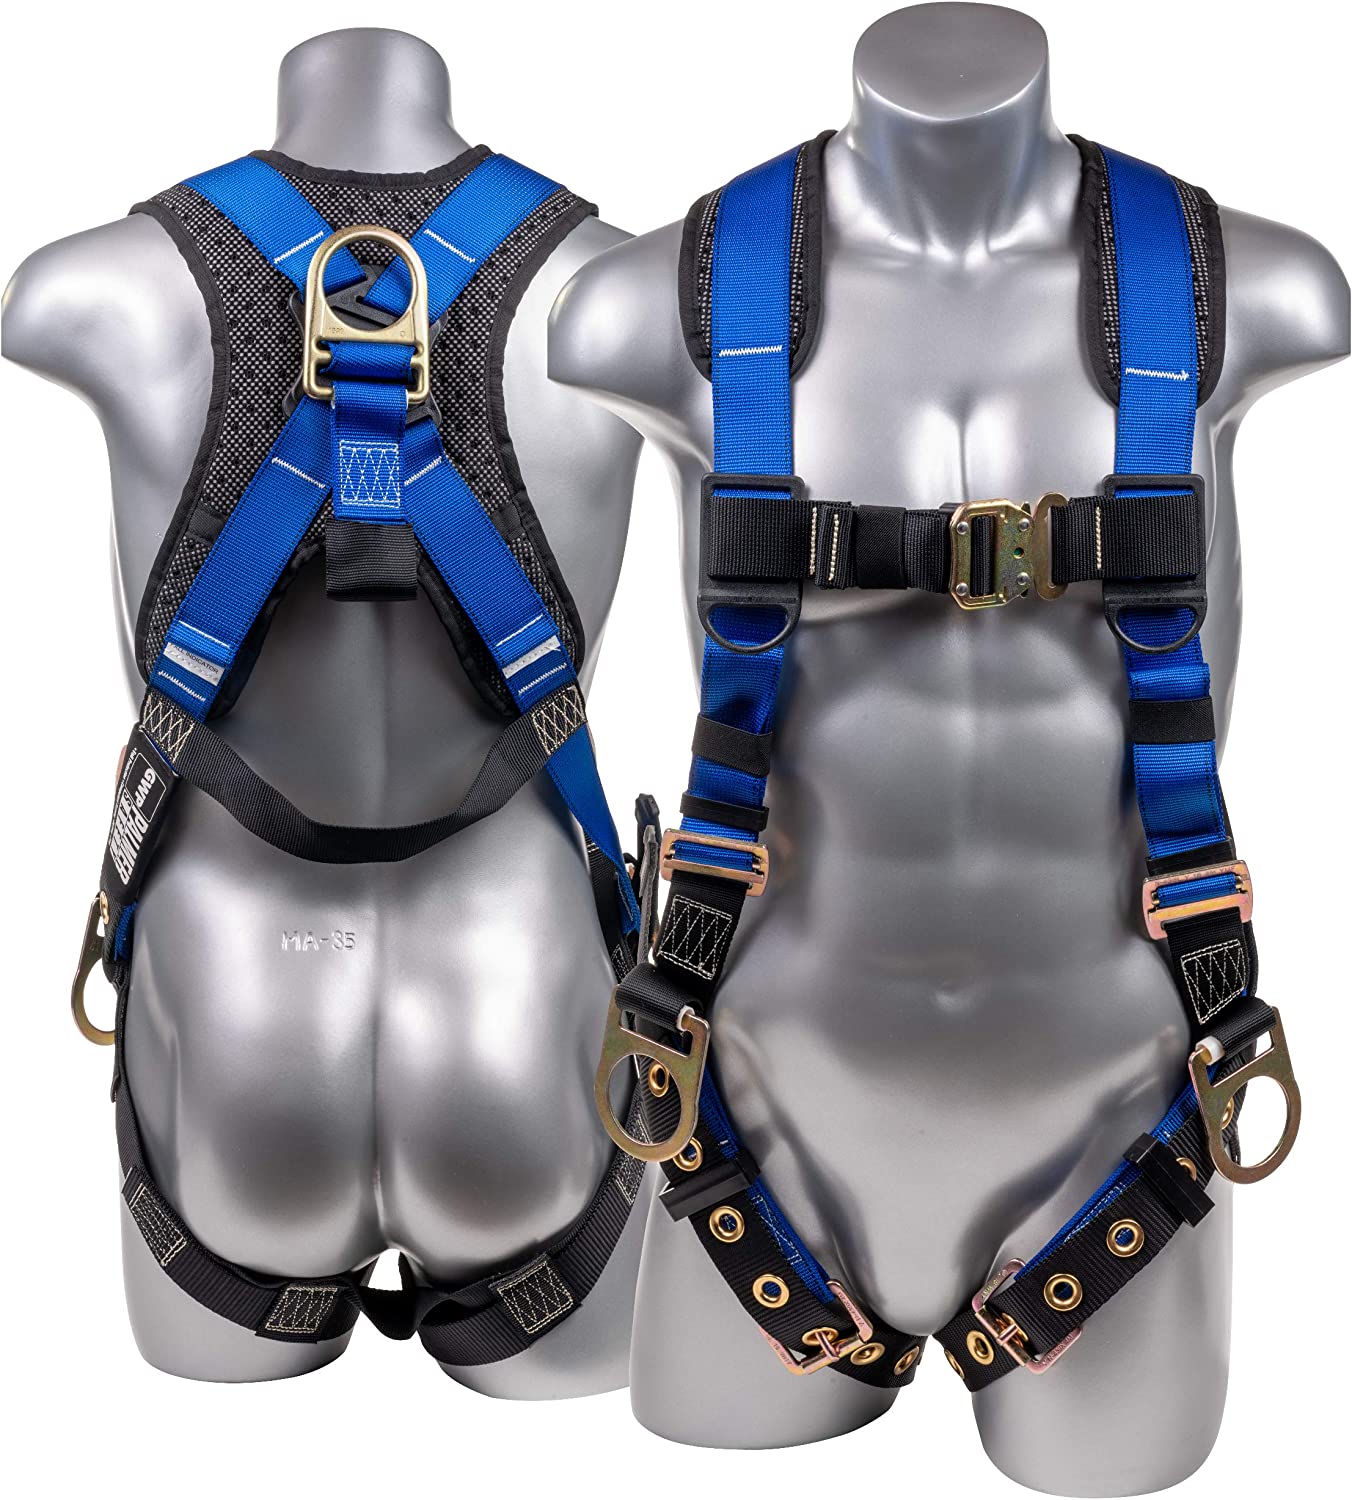 Palmer Safety Fall Protection 5pt Safety Harness, Dorsal D-ring,  Quick-Connect Buckle, Grommet Legs, Sewn in Back Pad I OSHA ANSI Compliant  Personal Equipment (Blue Universal)